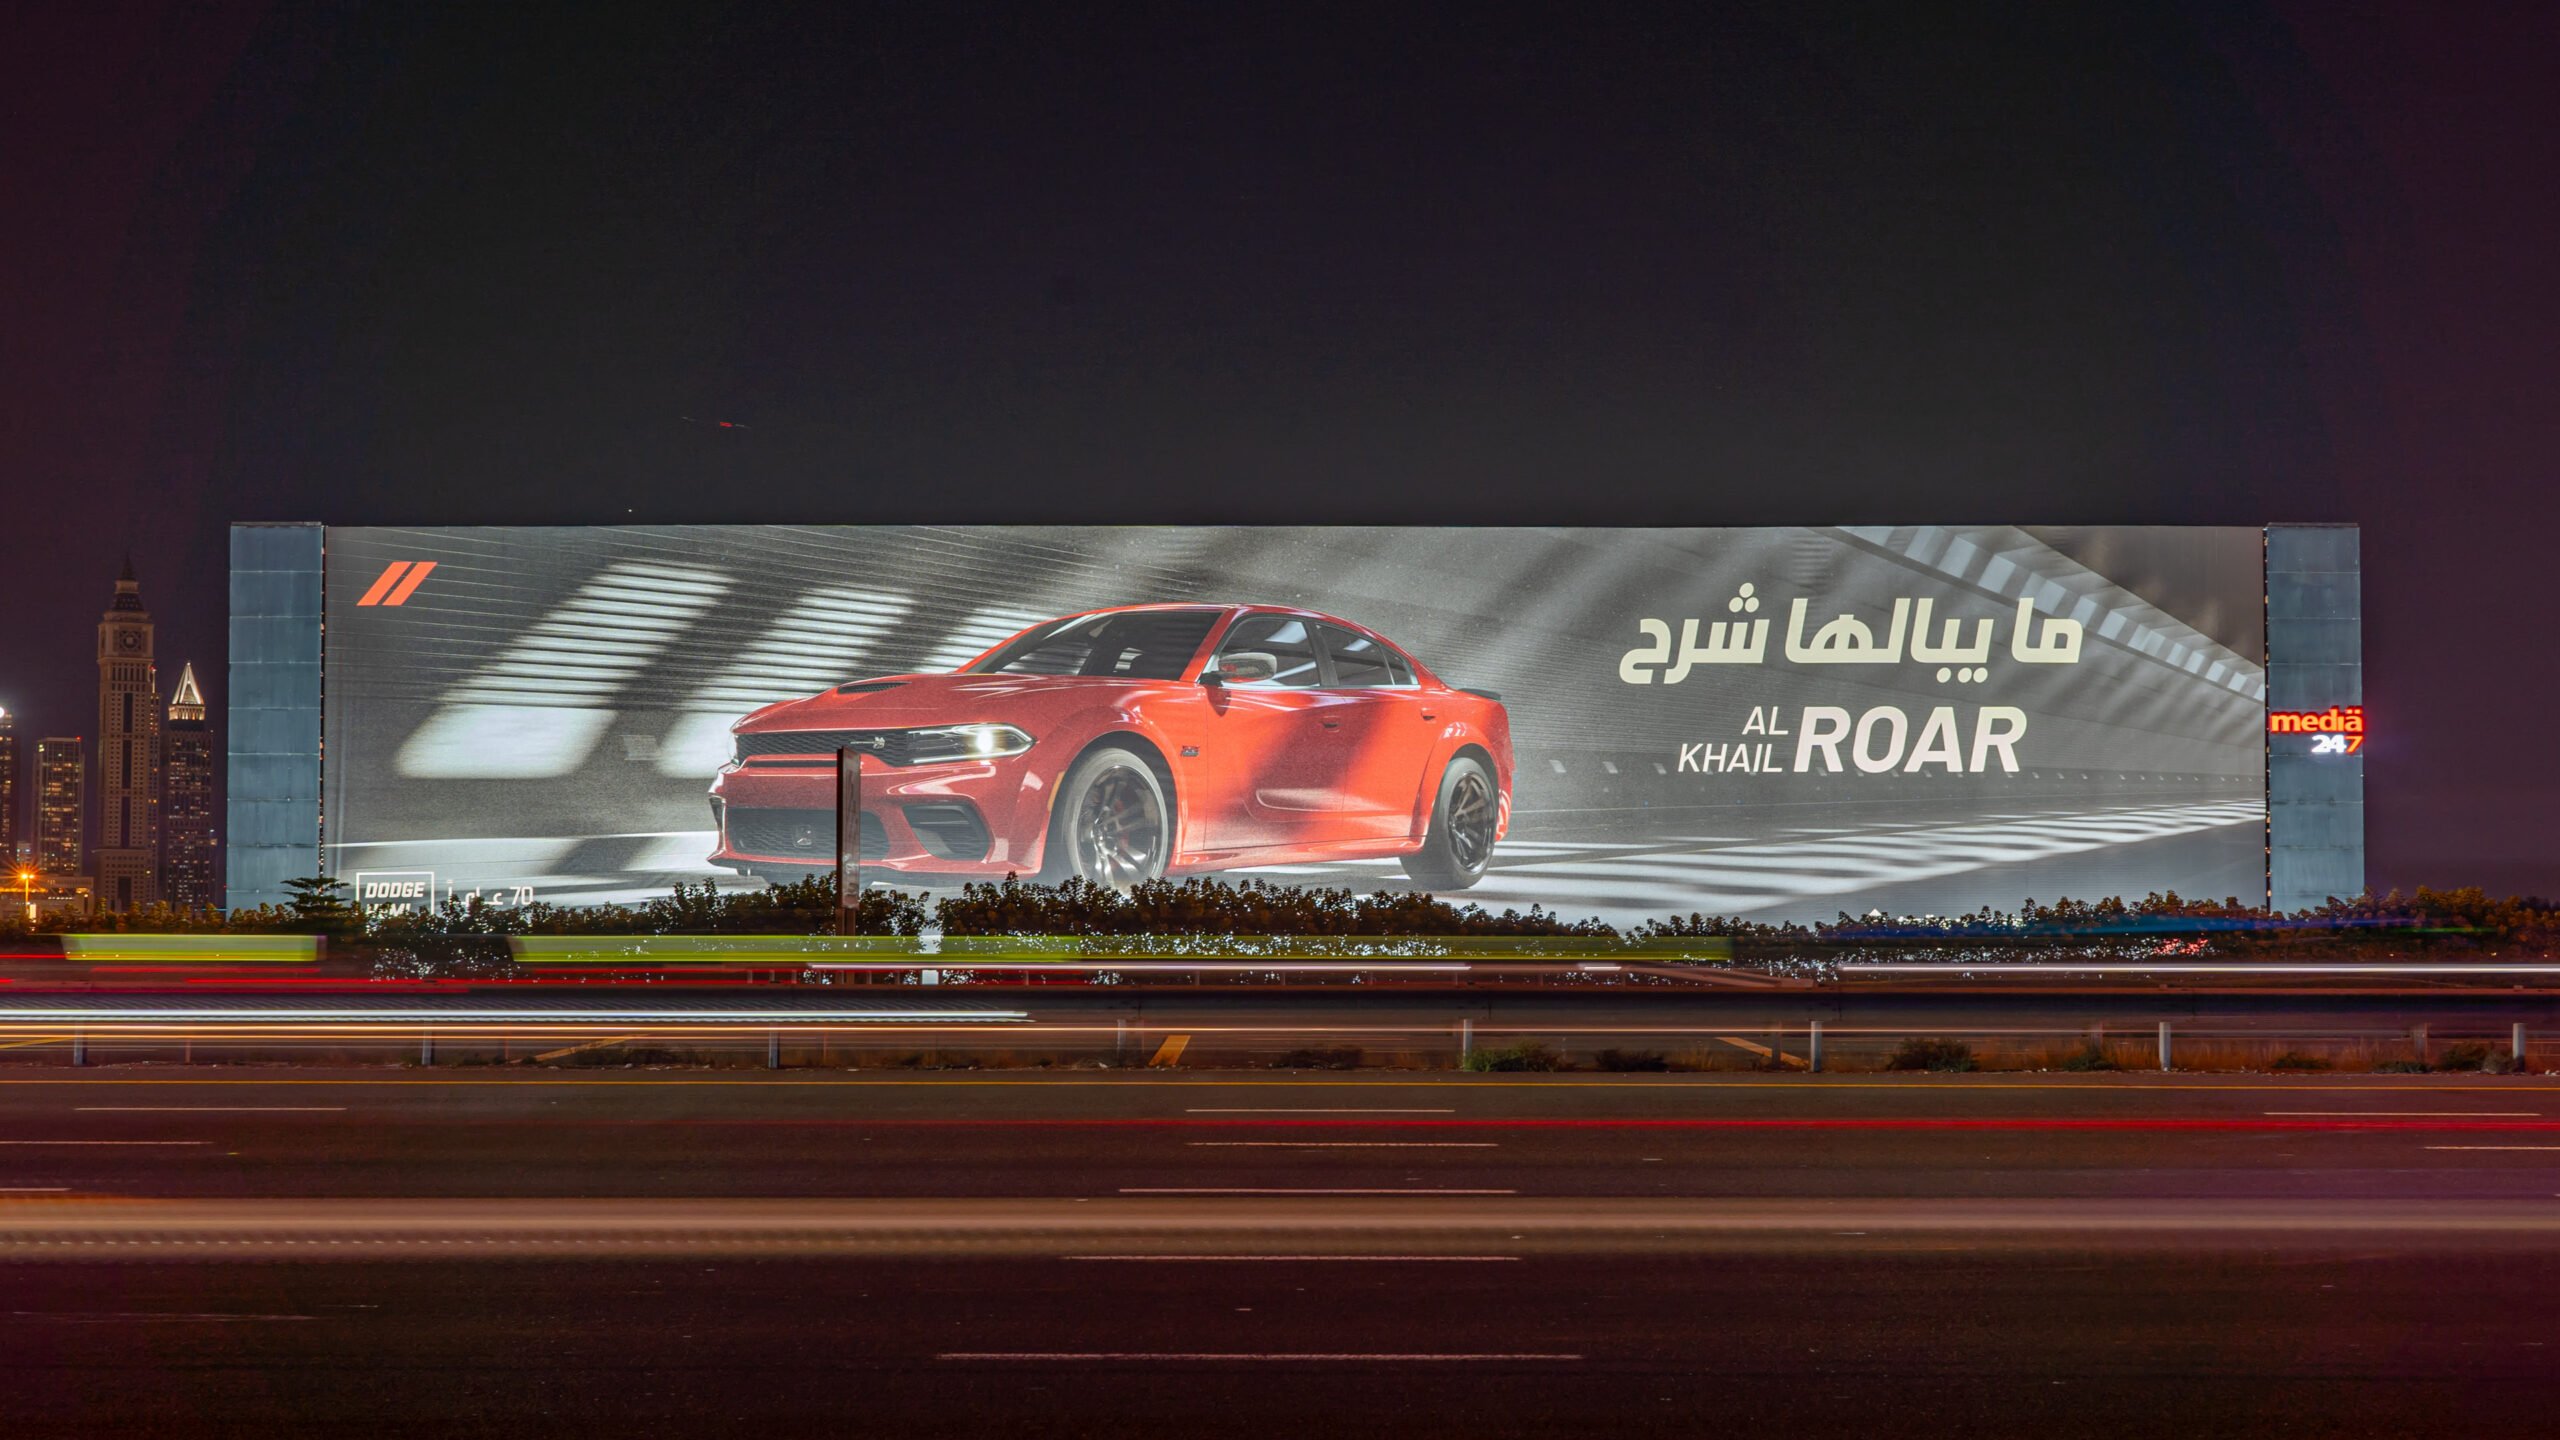 Dodge Ignites the Final Rev: Experience the Dodge HEMI® V8 Engines in the Middle East One Last Time